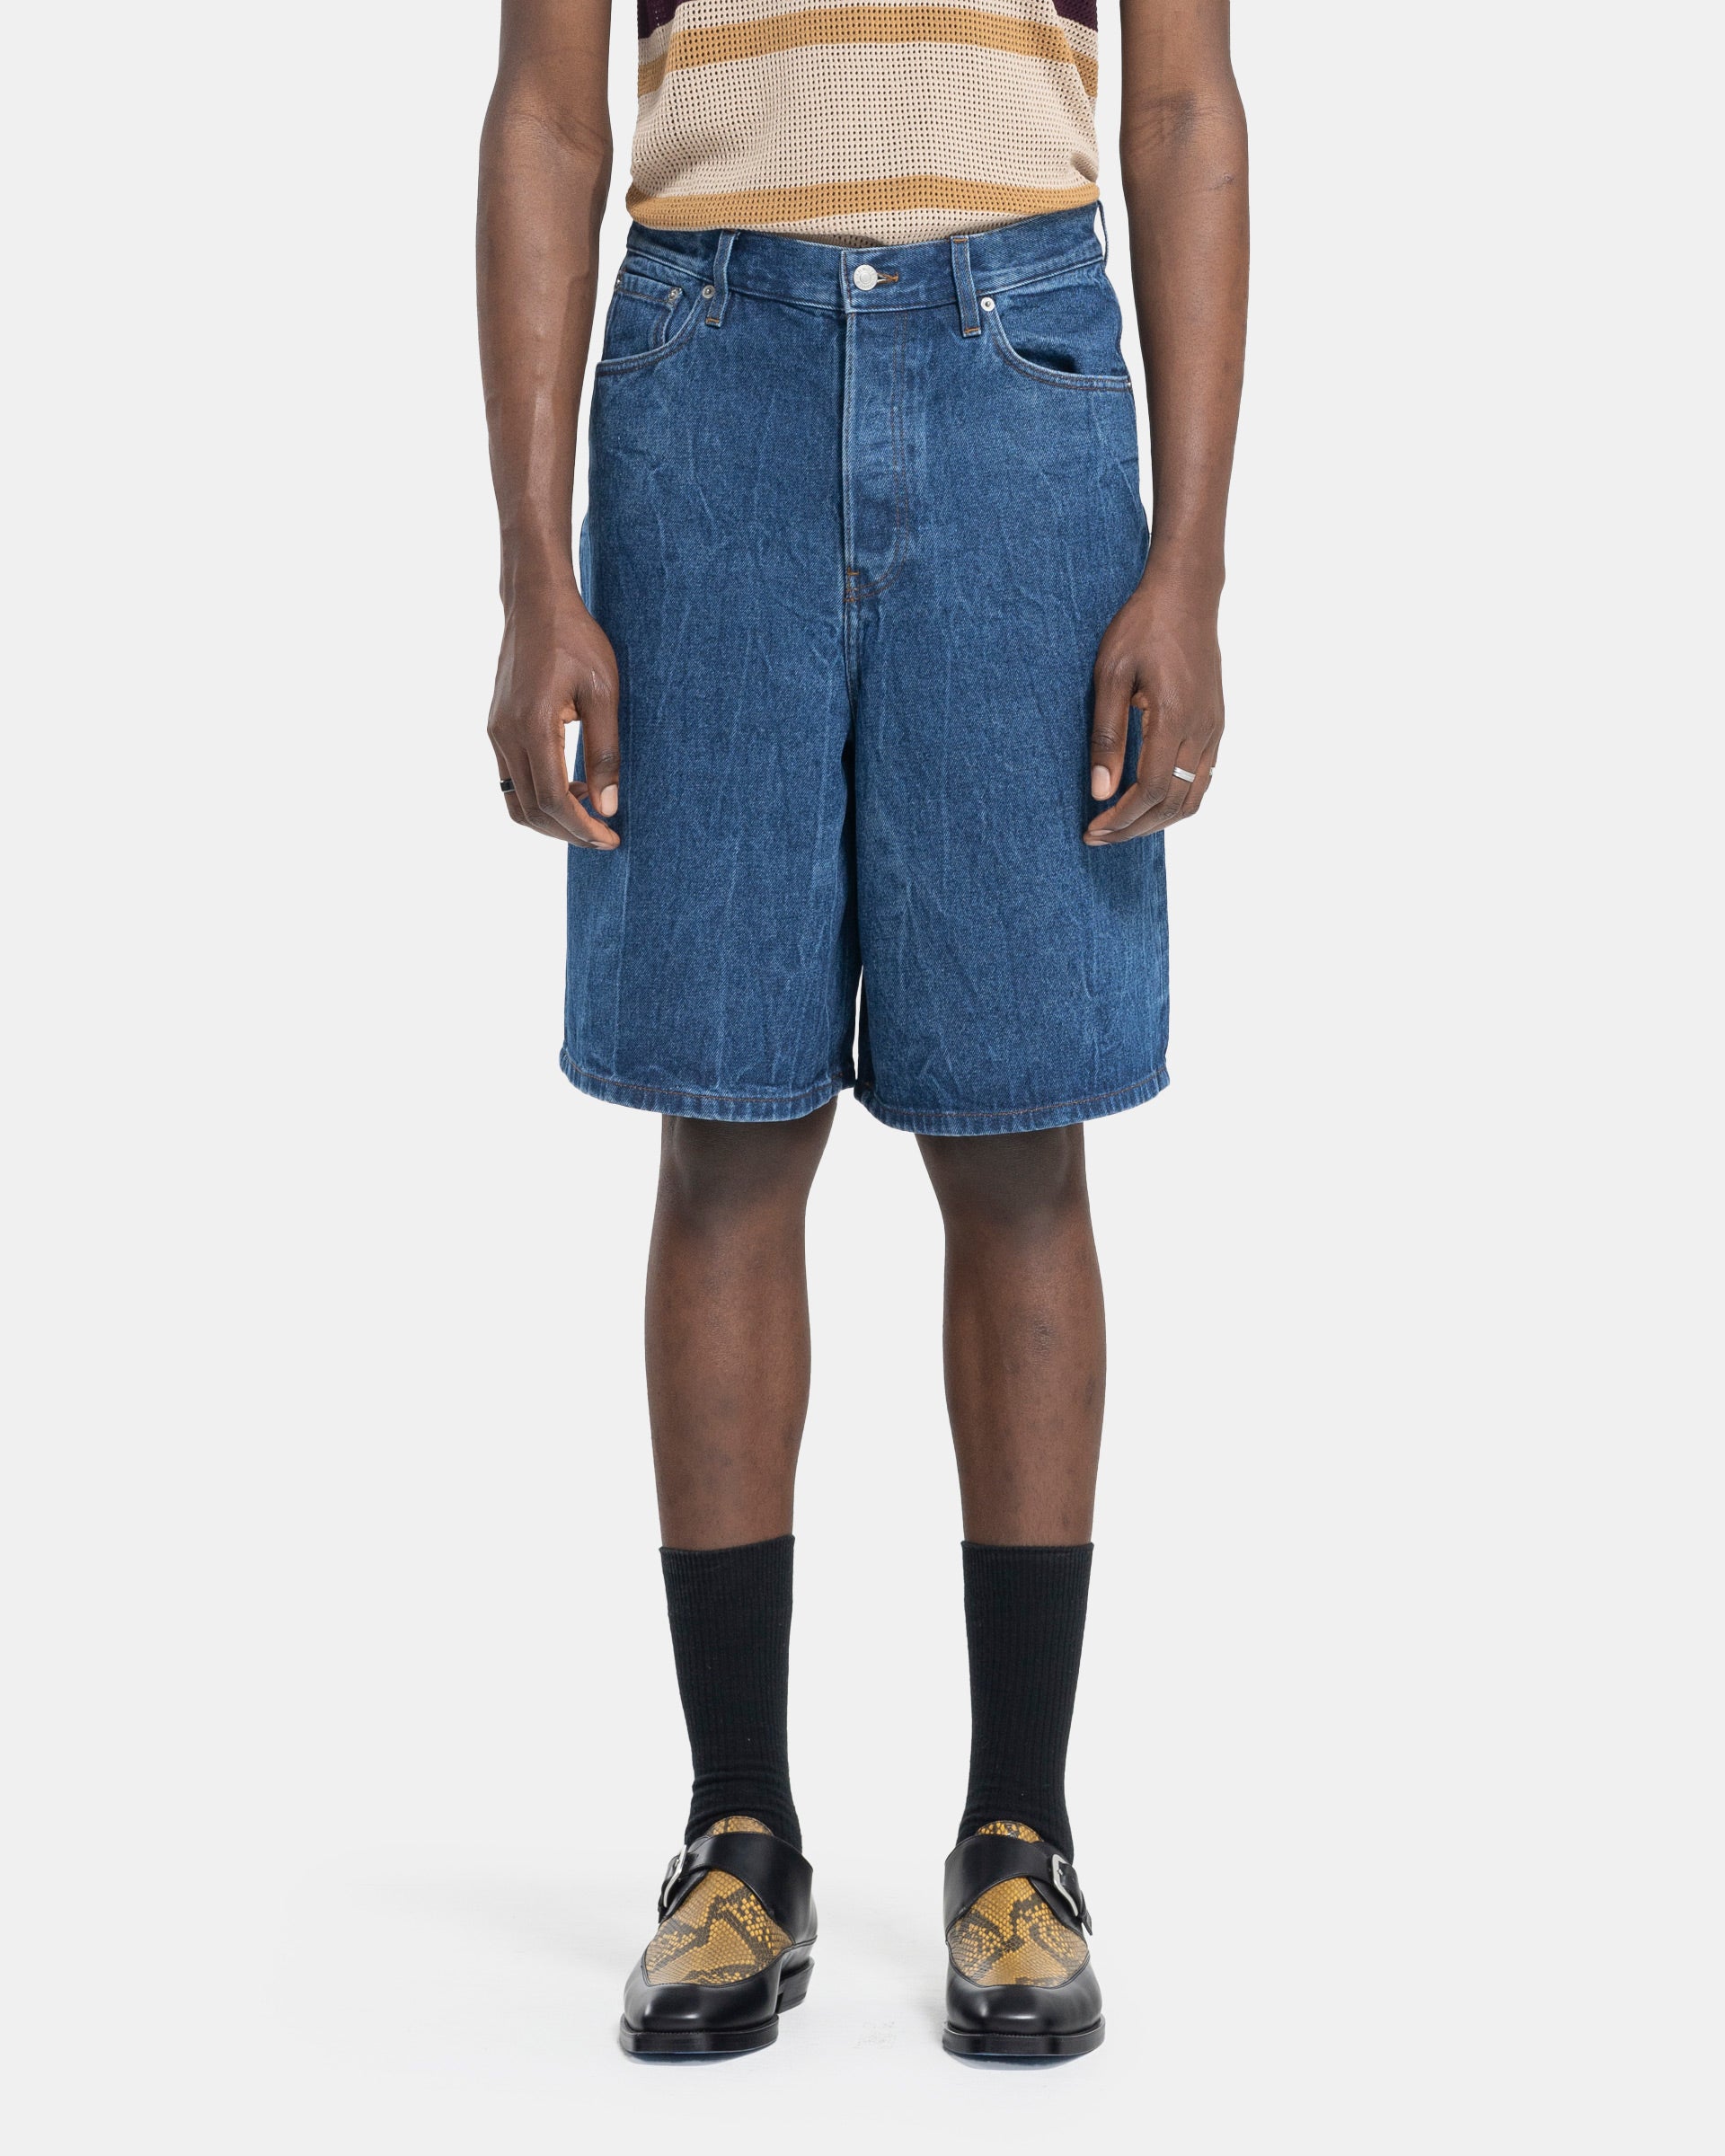 Model wearing Dries Van Noten Pinot Short Pants in Washed Blue on white background